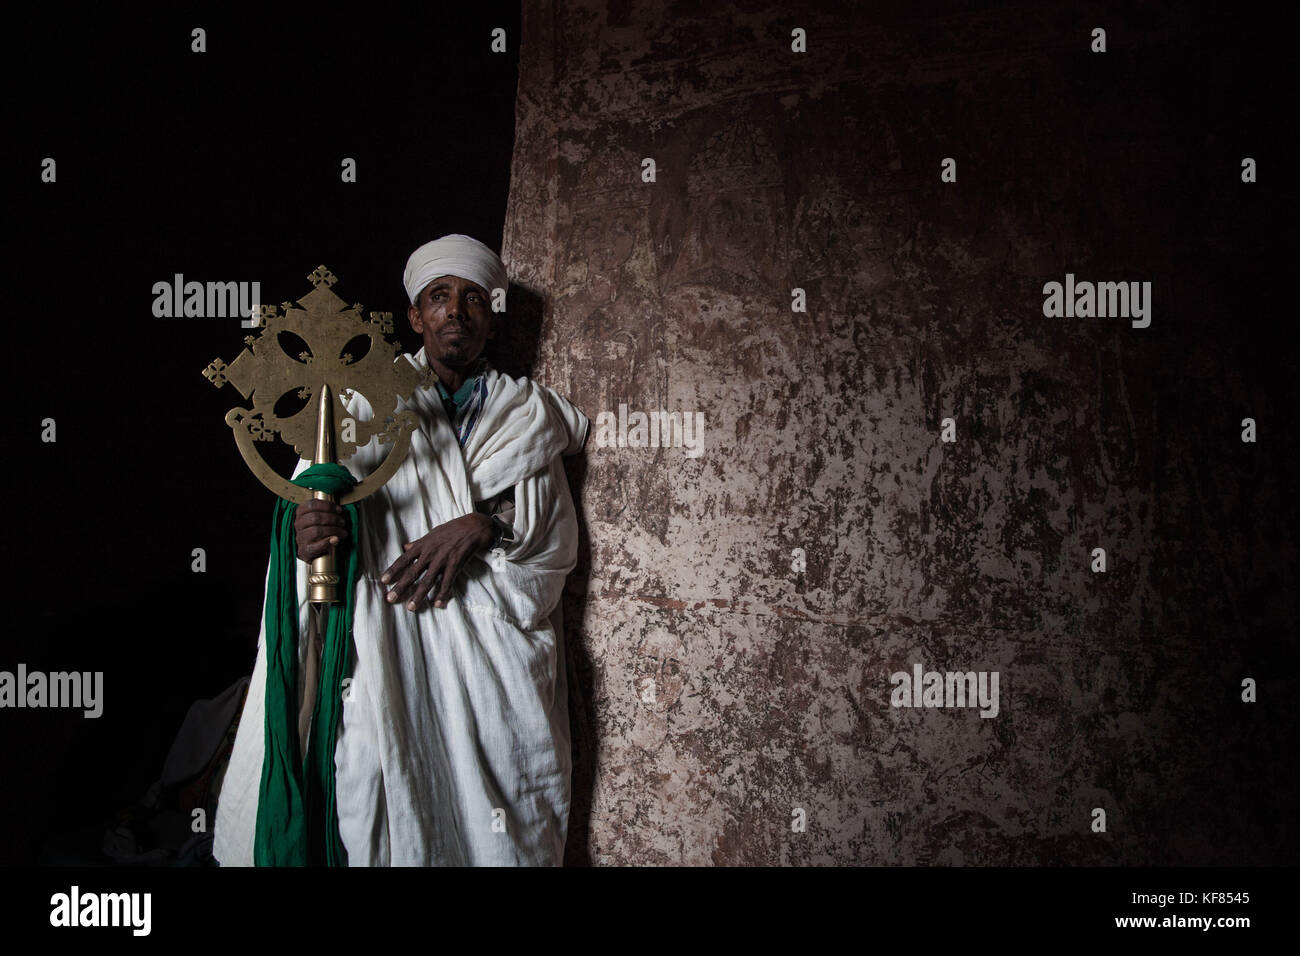 Priest holding a cross in a church in Lalibela, Ethiopia Stock Photo